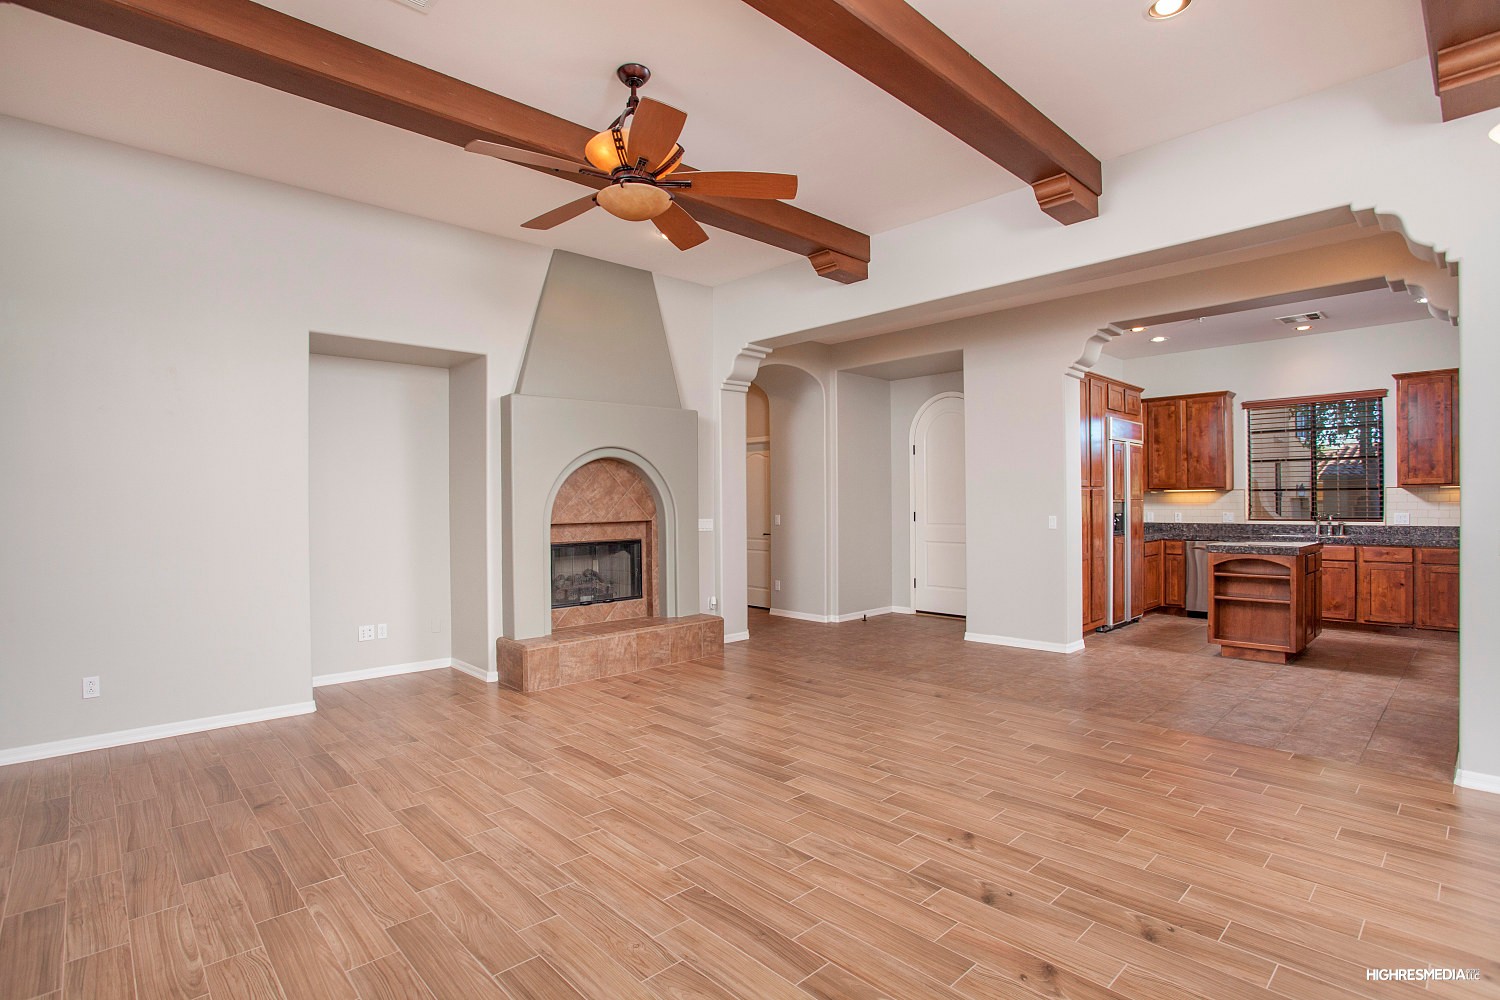 Expansive great room at this Scottsdale townhome for sale in Market Street at DC Ranch located at 20704 N 90th Pl #1005 Scottsdale, AZ 85255 listed by Don Matheson at The Matheson Team